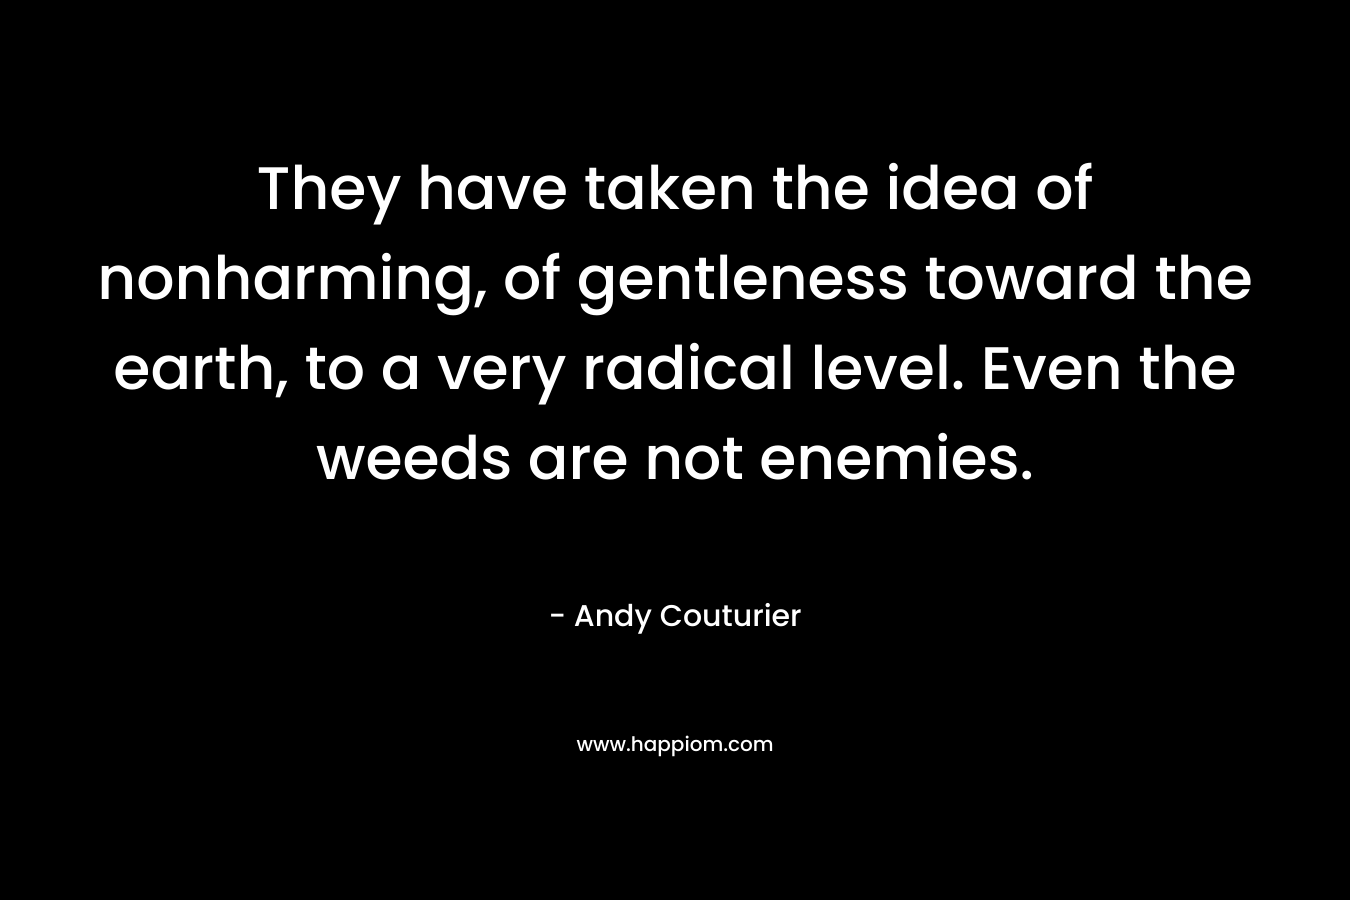 They have taken the idea of nonharming, of gentleness toward the earth, to a very radical level. Even the weeds are not enemies. – Andy Couturier